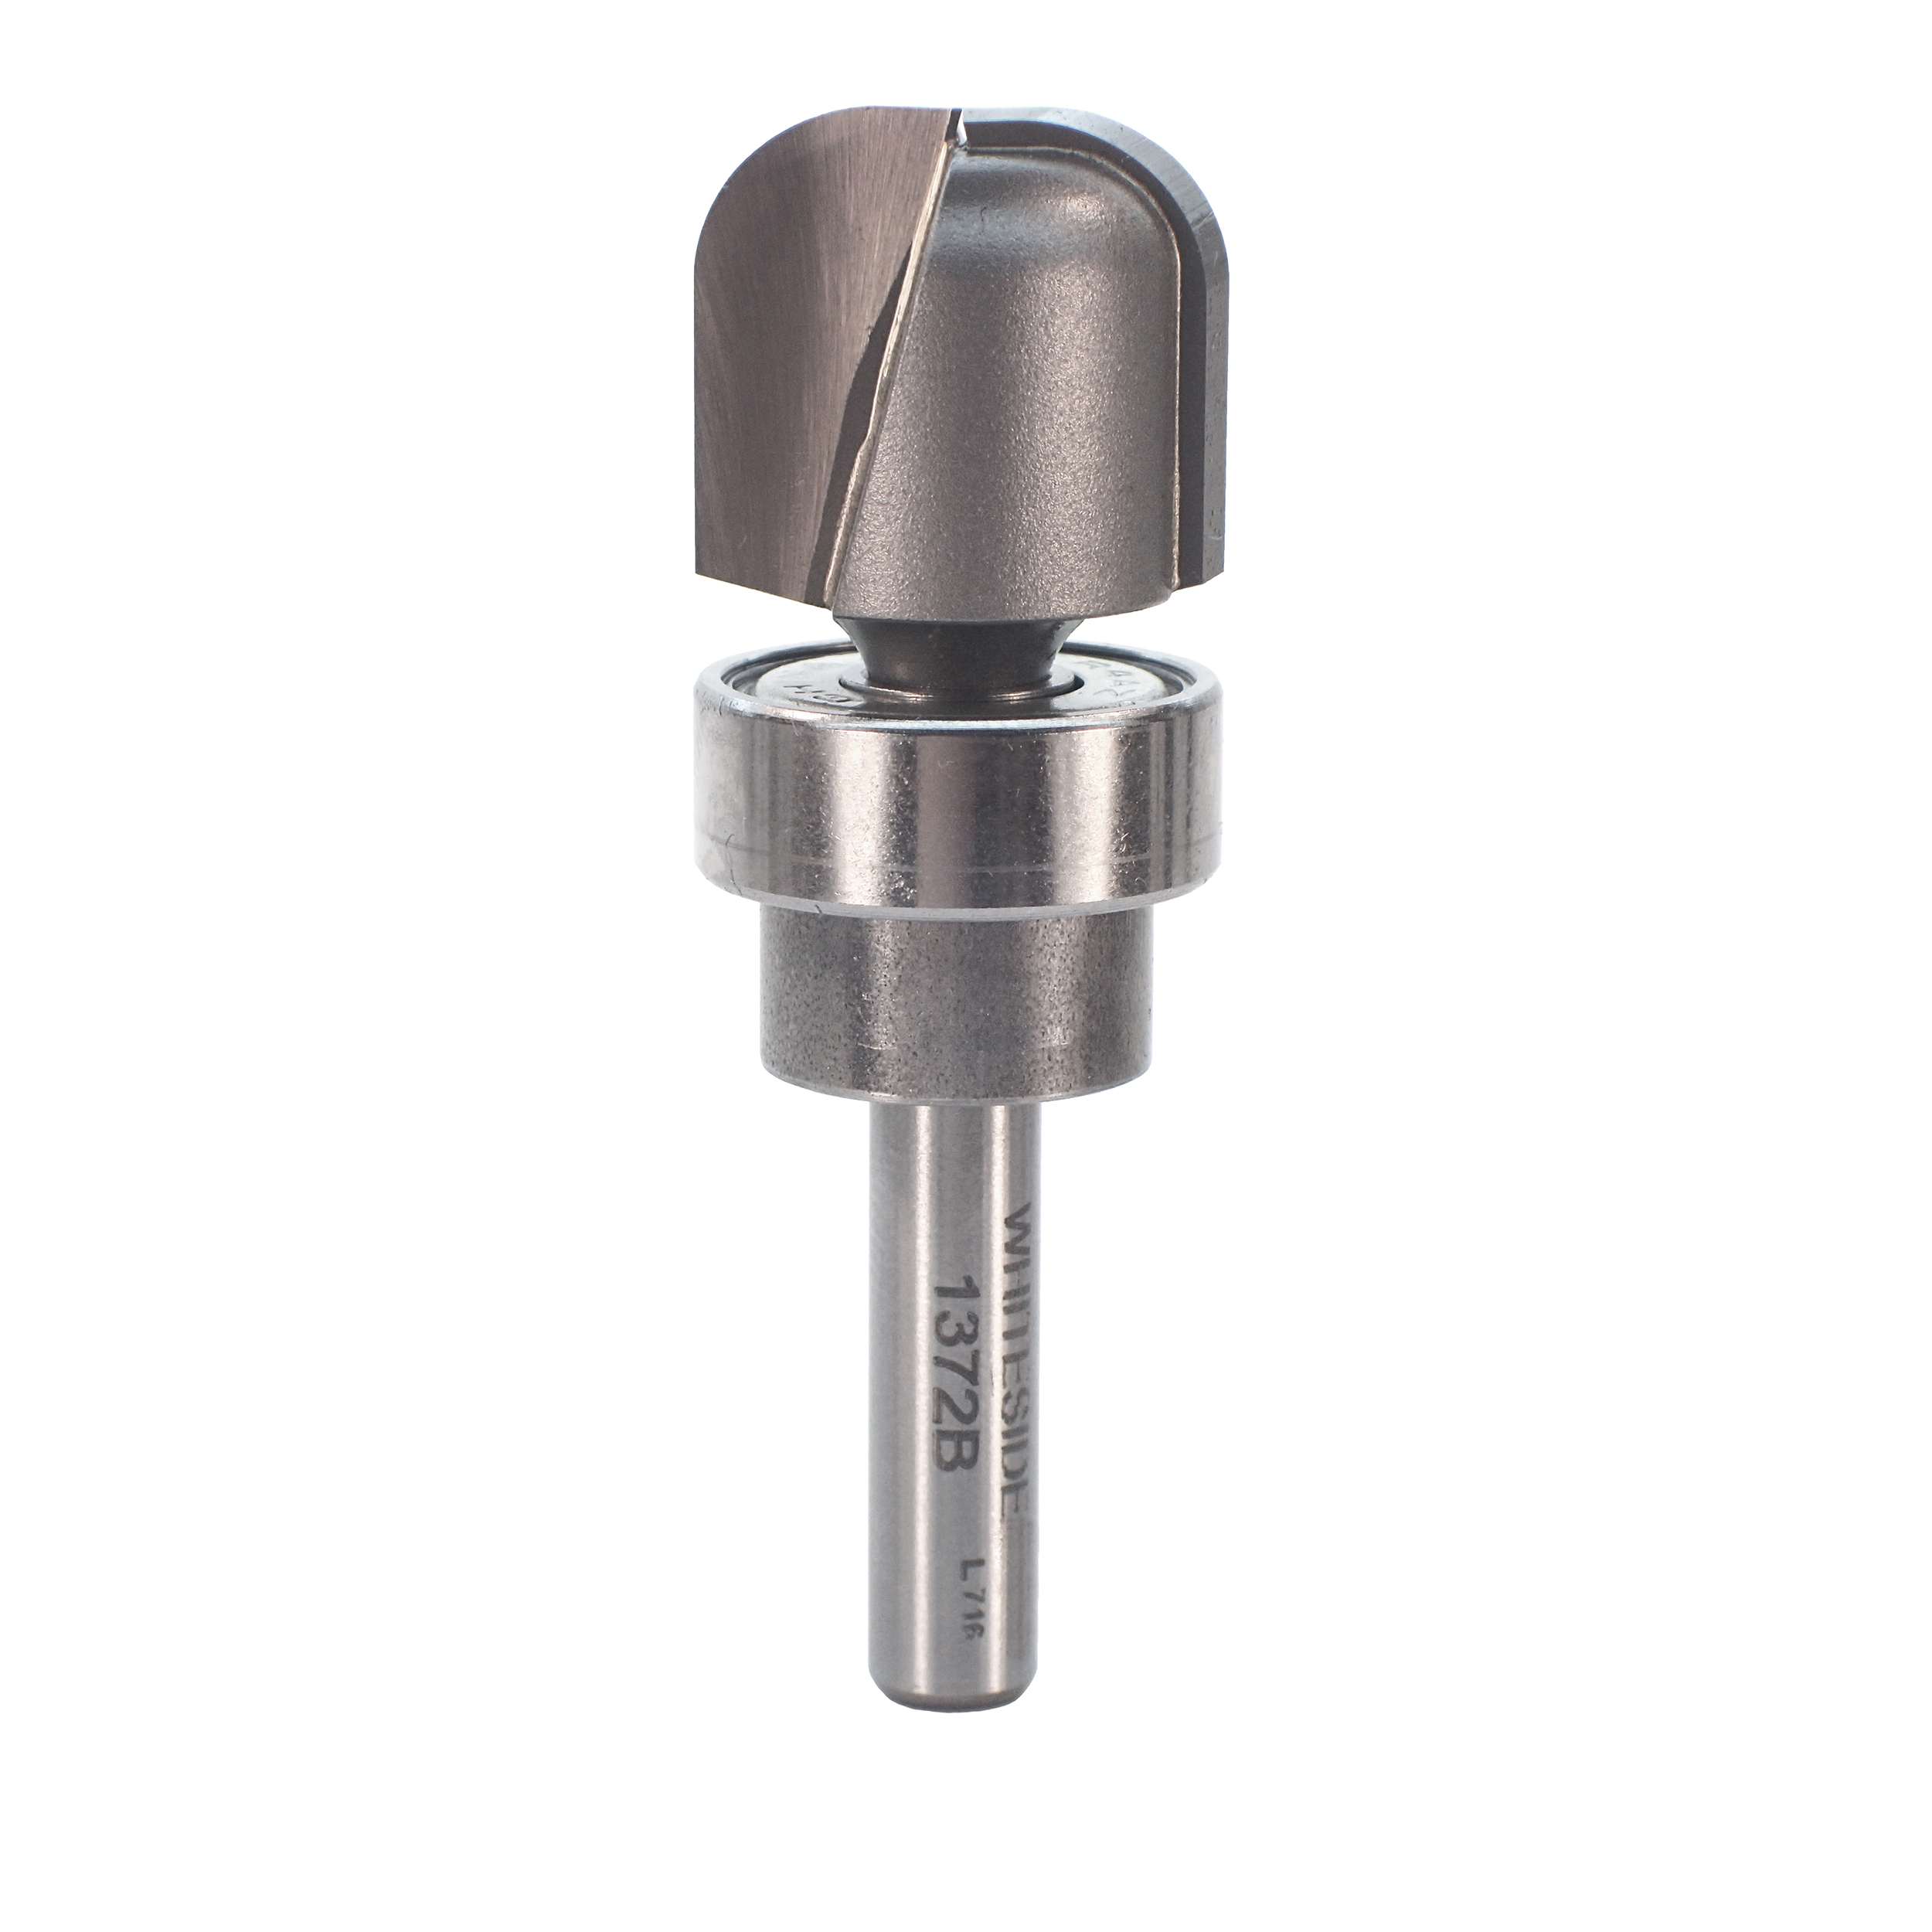 1376b Bowl And Tray Router Bit With Bearing 1/4" R 1-1/4" Od X 1/2" Cl 2-1/8" Ol 1/2" Sh